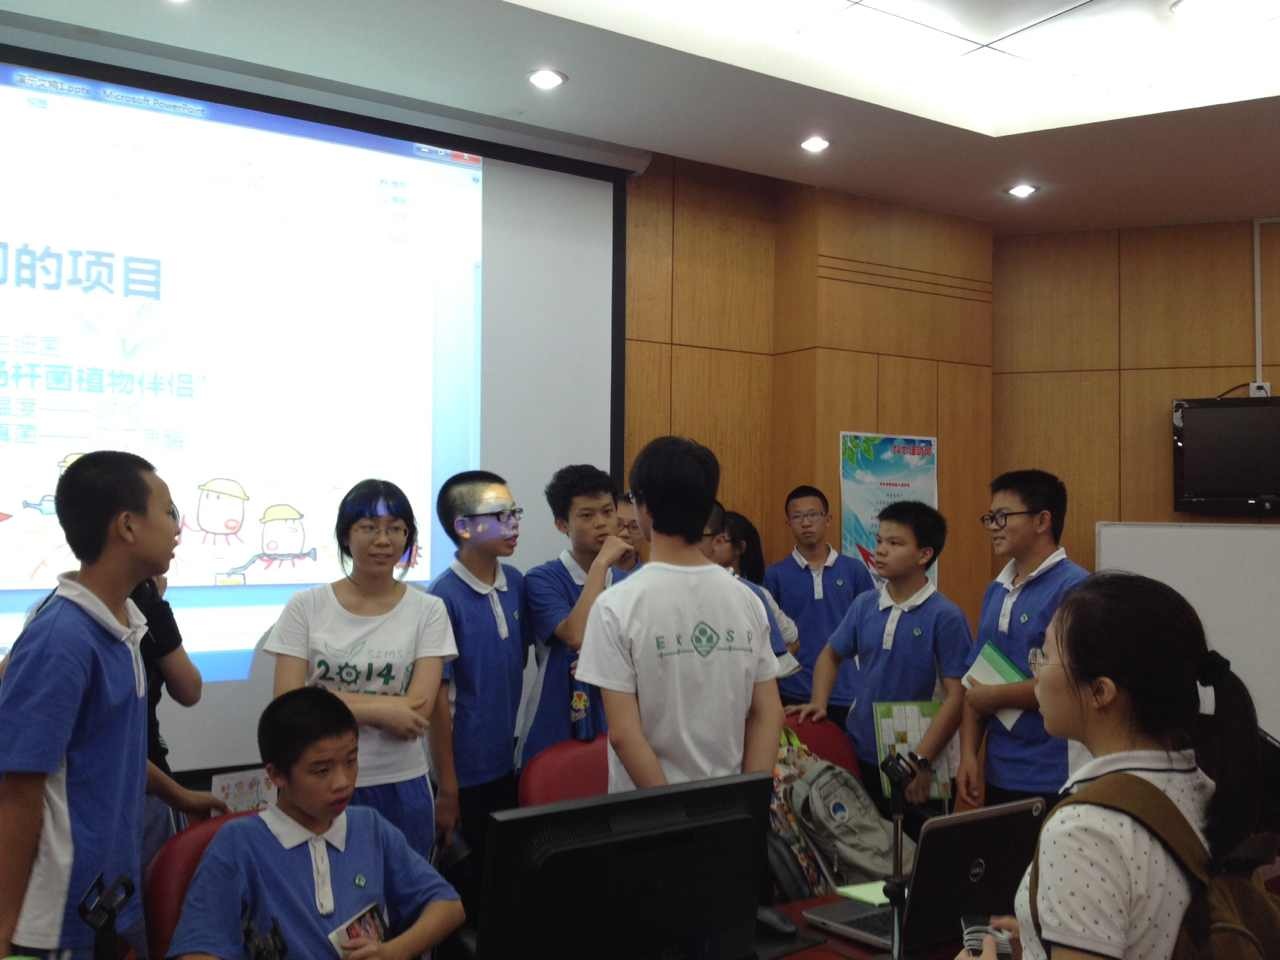 lecture at Shenzhen Middle School